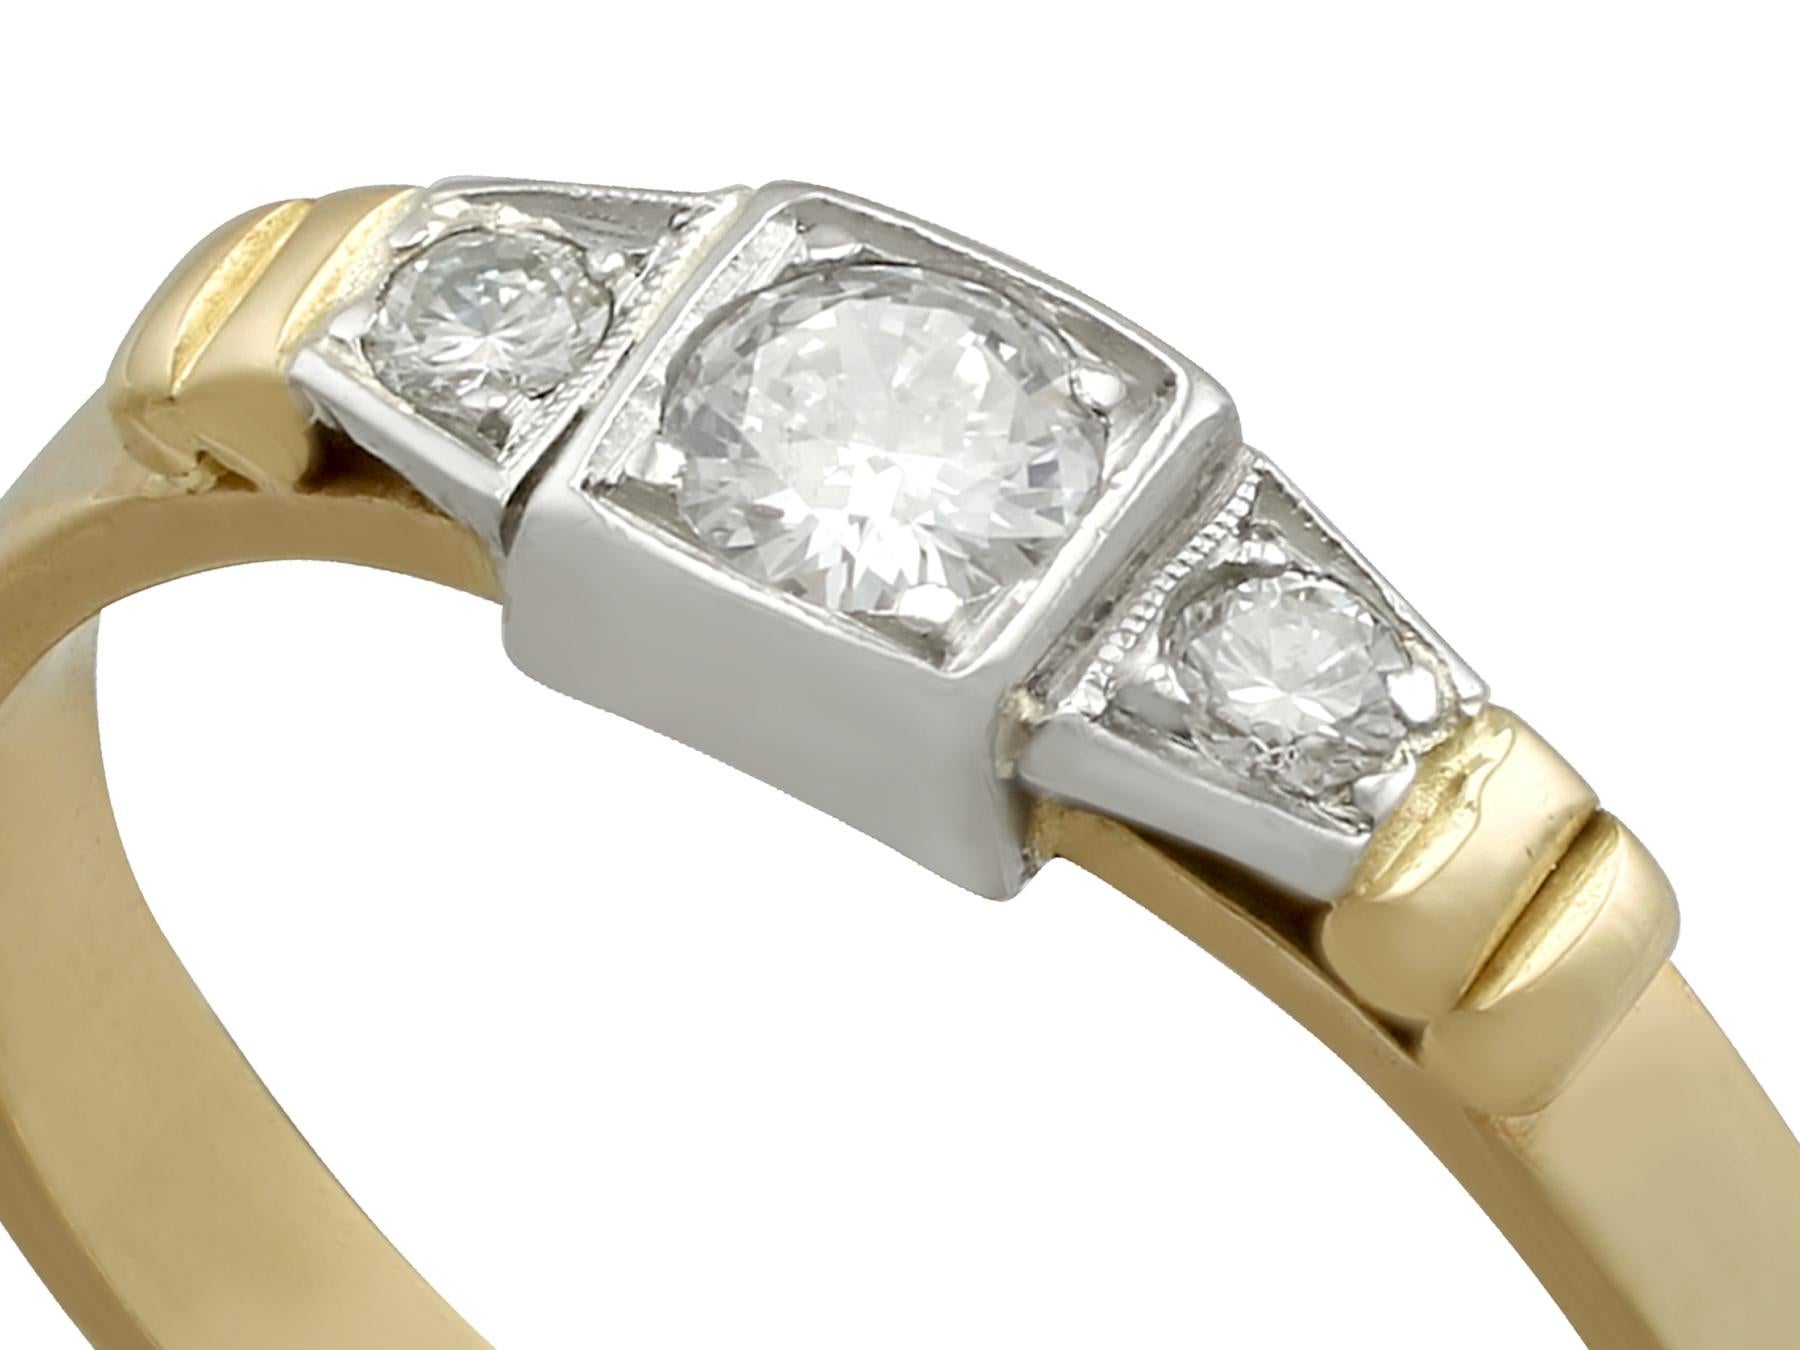 A fine and impressive vintage 0.43 carat diamond and 18 karat yellow gold, 18 karat white gold set three stone ring; part of our vintage jewelry and estate jewelry collections

This fine and impressive vintage 1950s diamond ring has been crafted in